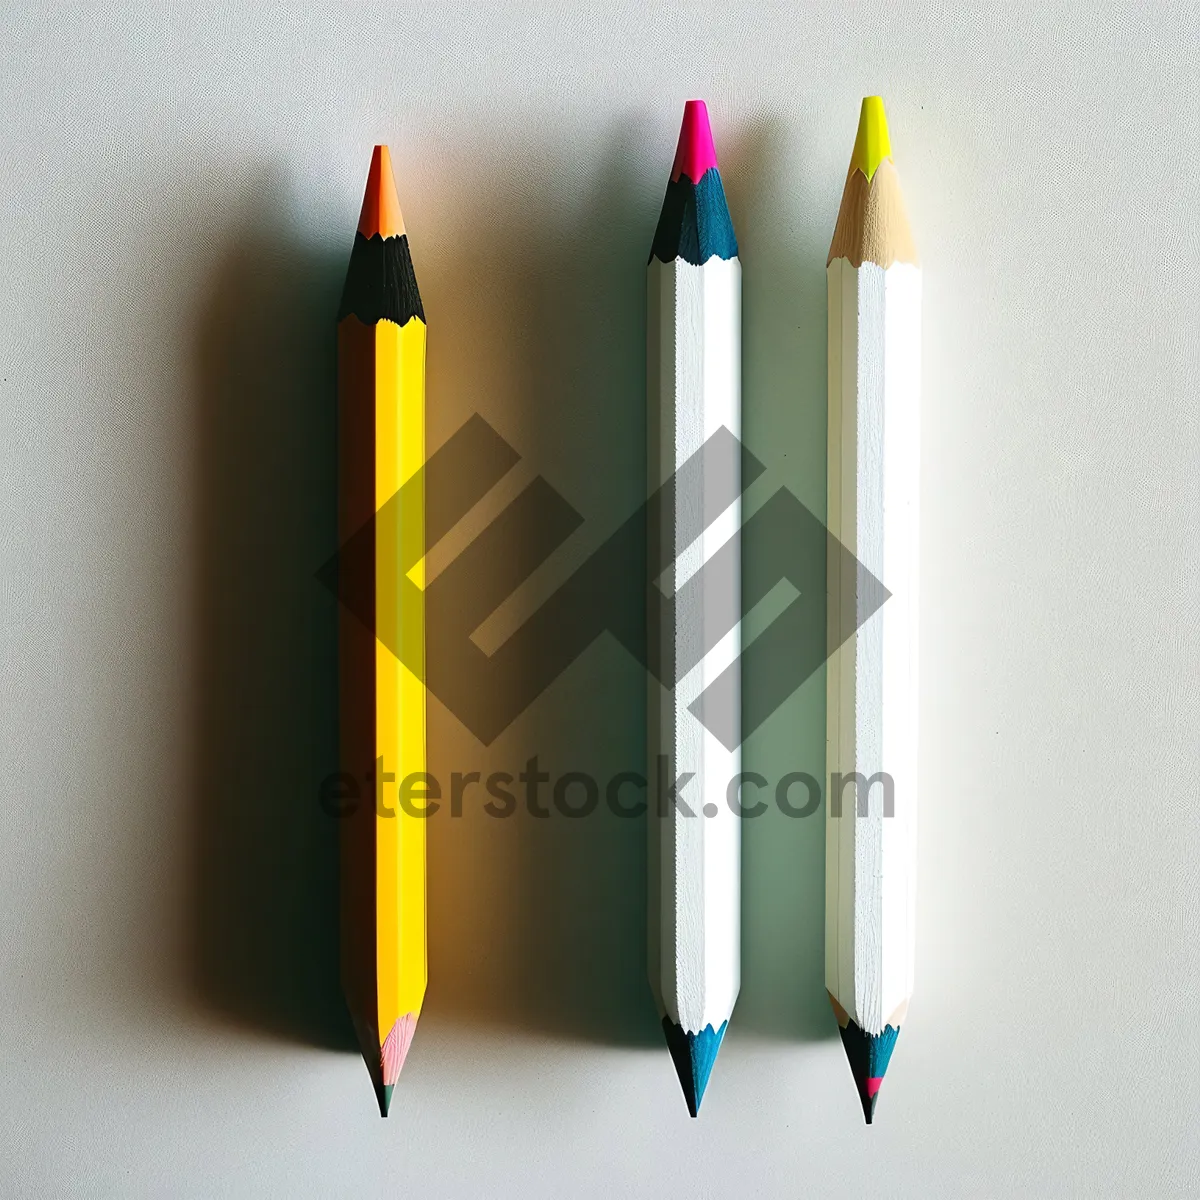 Picture of Colorful Wooden Pencil Set for Creative Art and Education